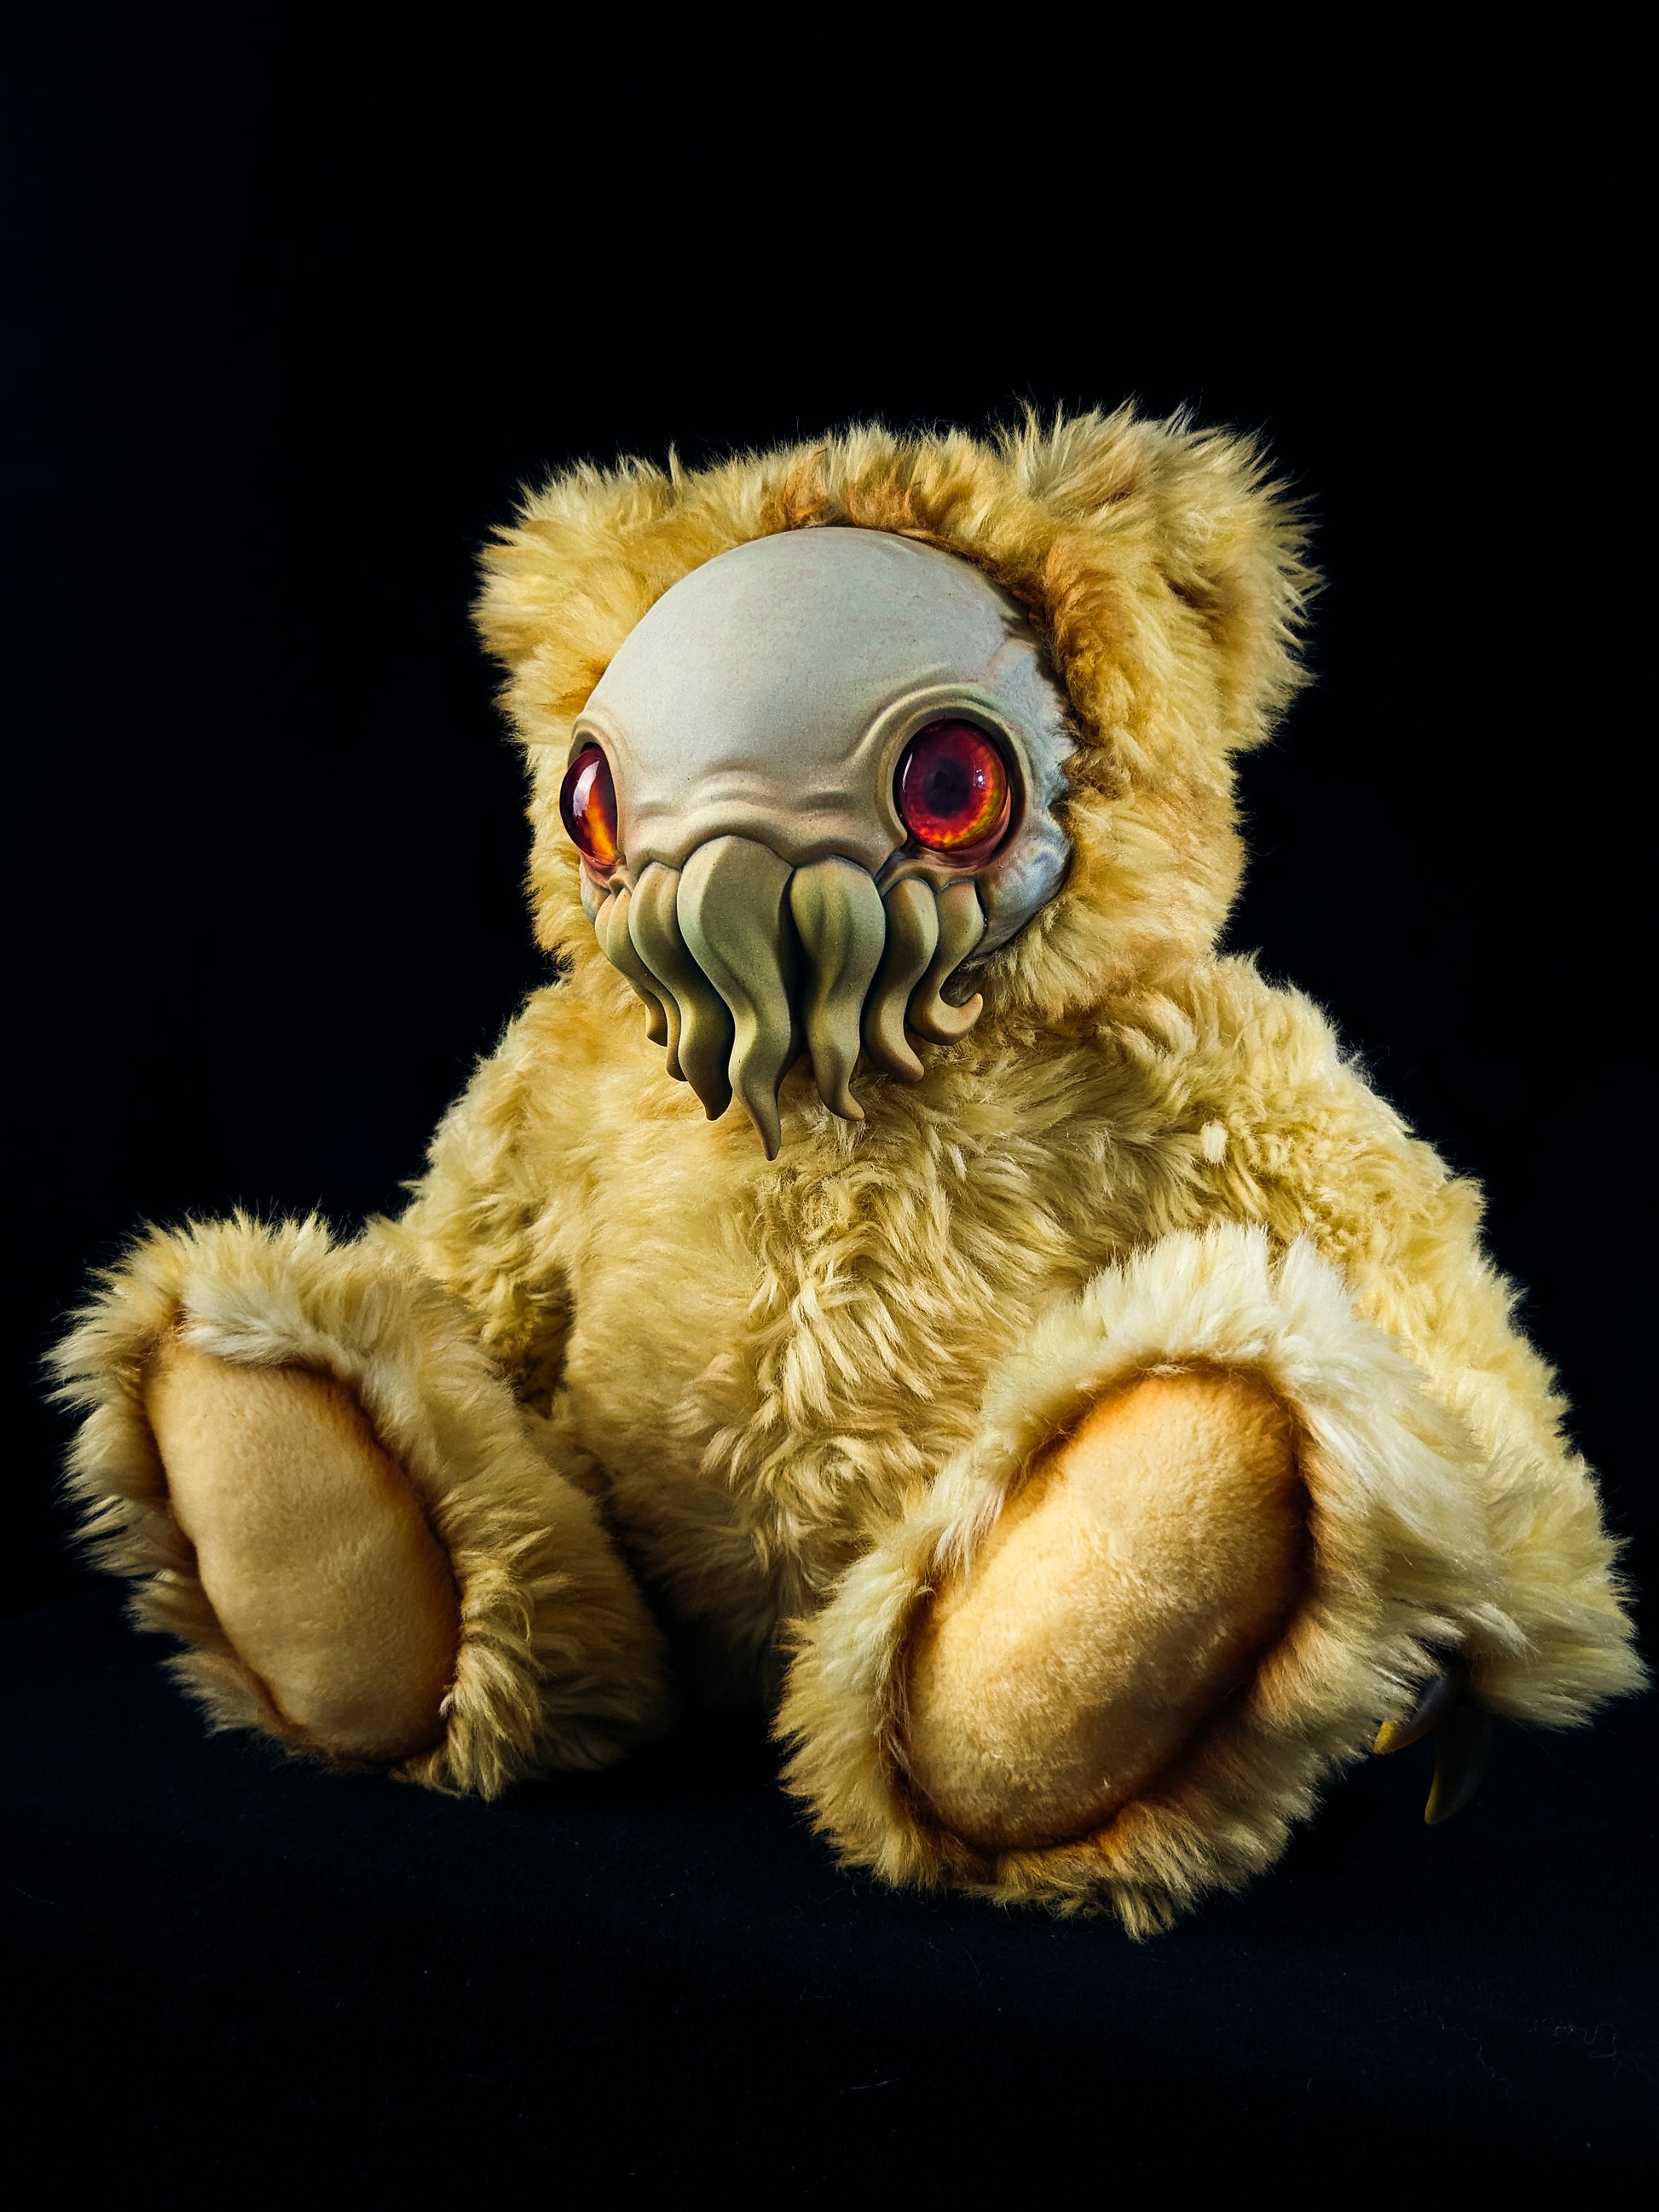 Lemon Leech: ELDINUTH - CRYPTCRITZ Handcrafted Lovecraftian Cthulhu Art Doll Plush Toy for Eldritch Entities